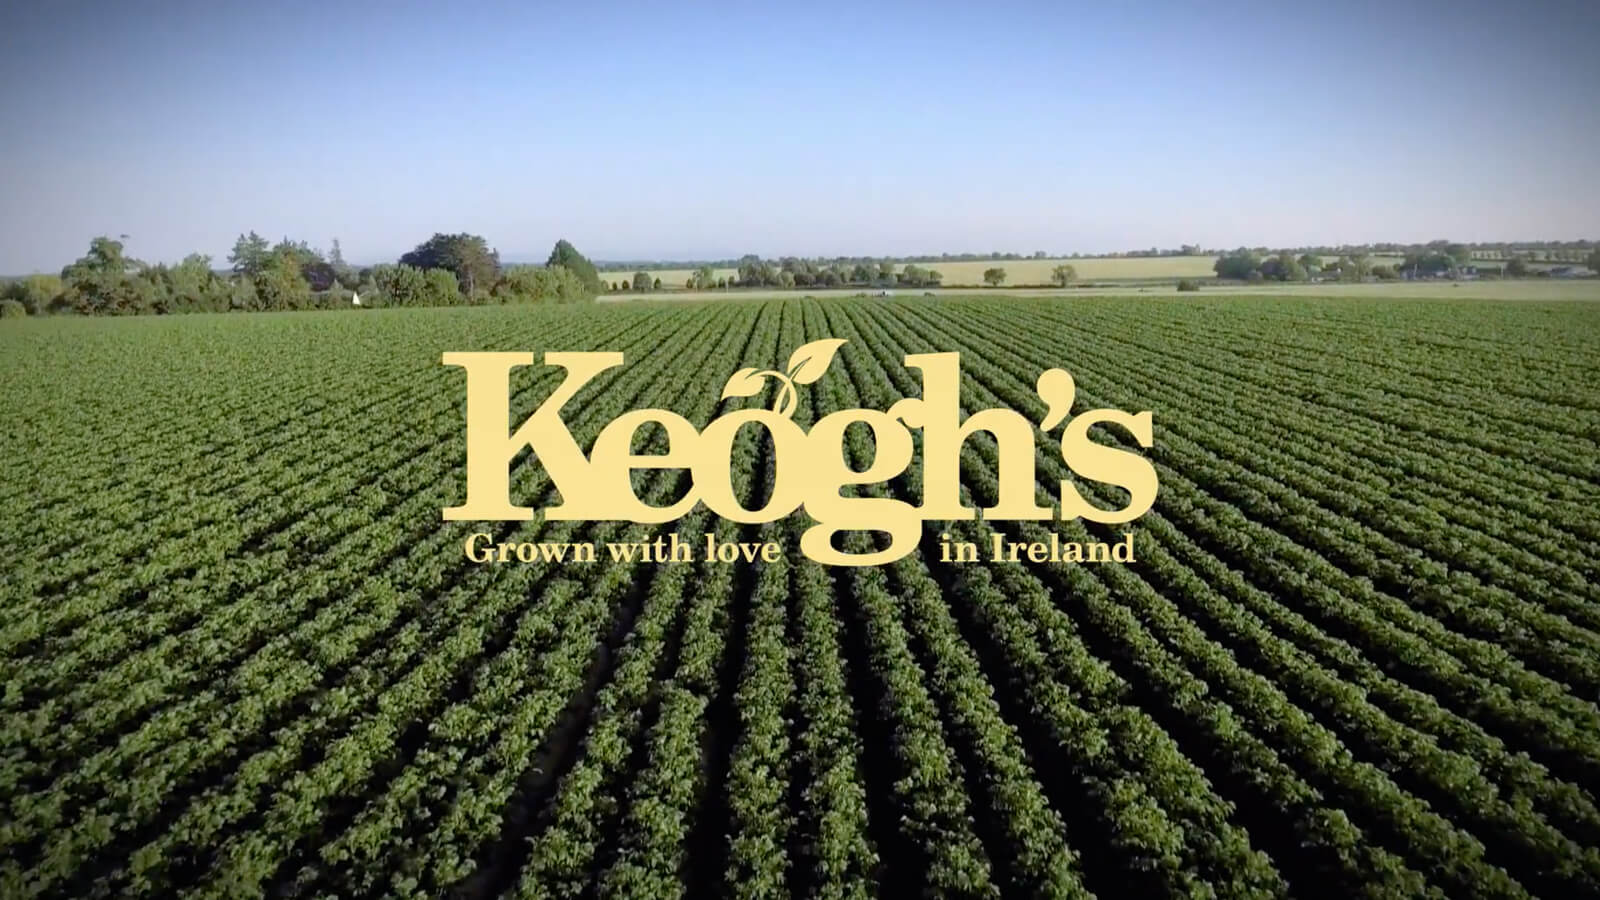 Keoghs - Our Story